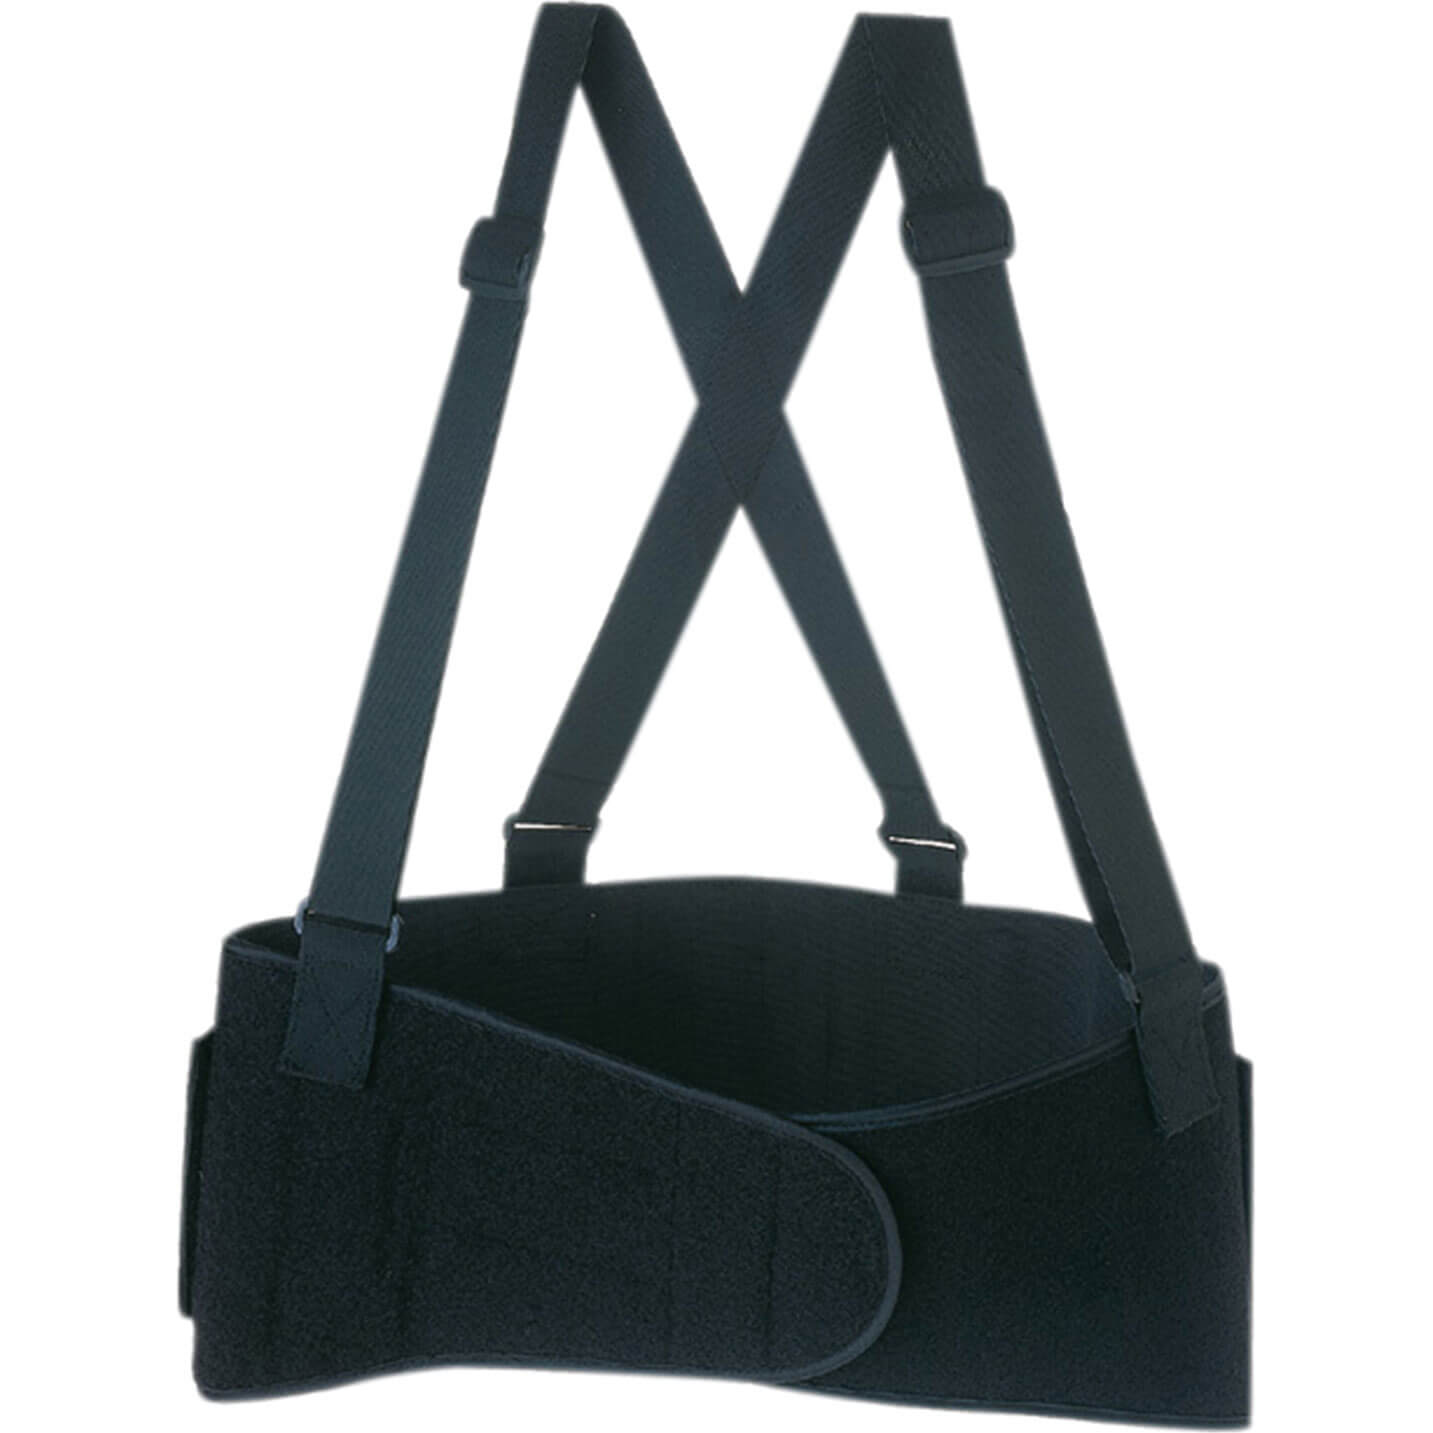 Image of Kunys Back Support and Suspenders